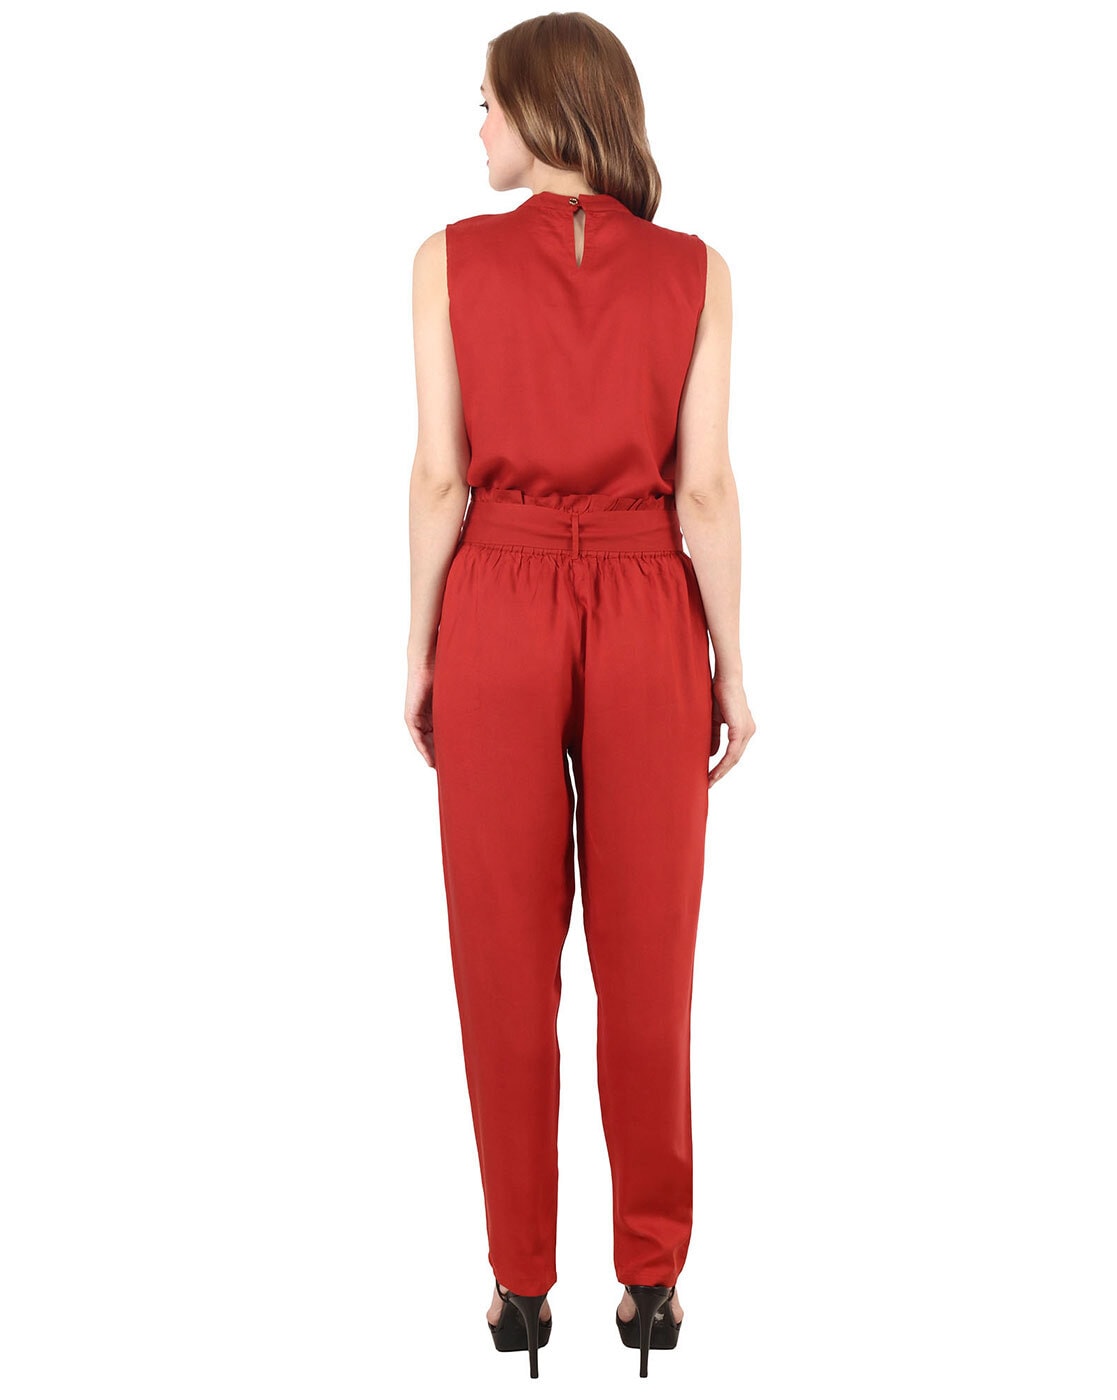 RED SMOKY SLEEVELESS JUMPSUIT WITH JACKET